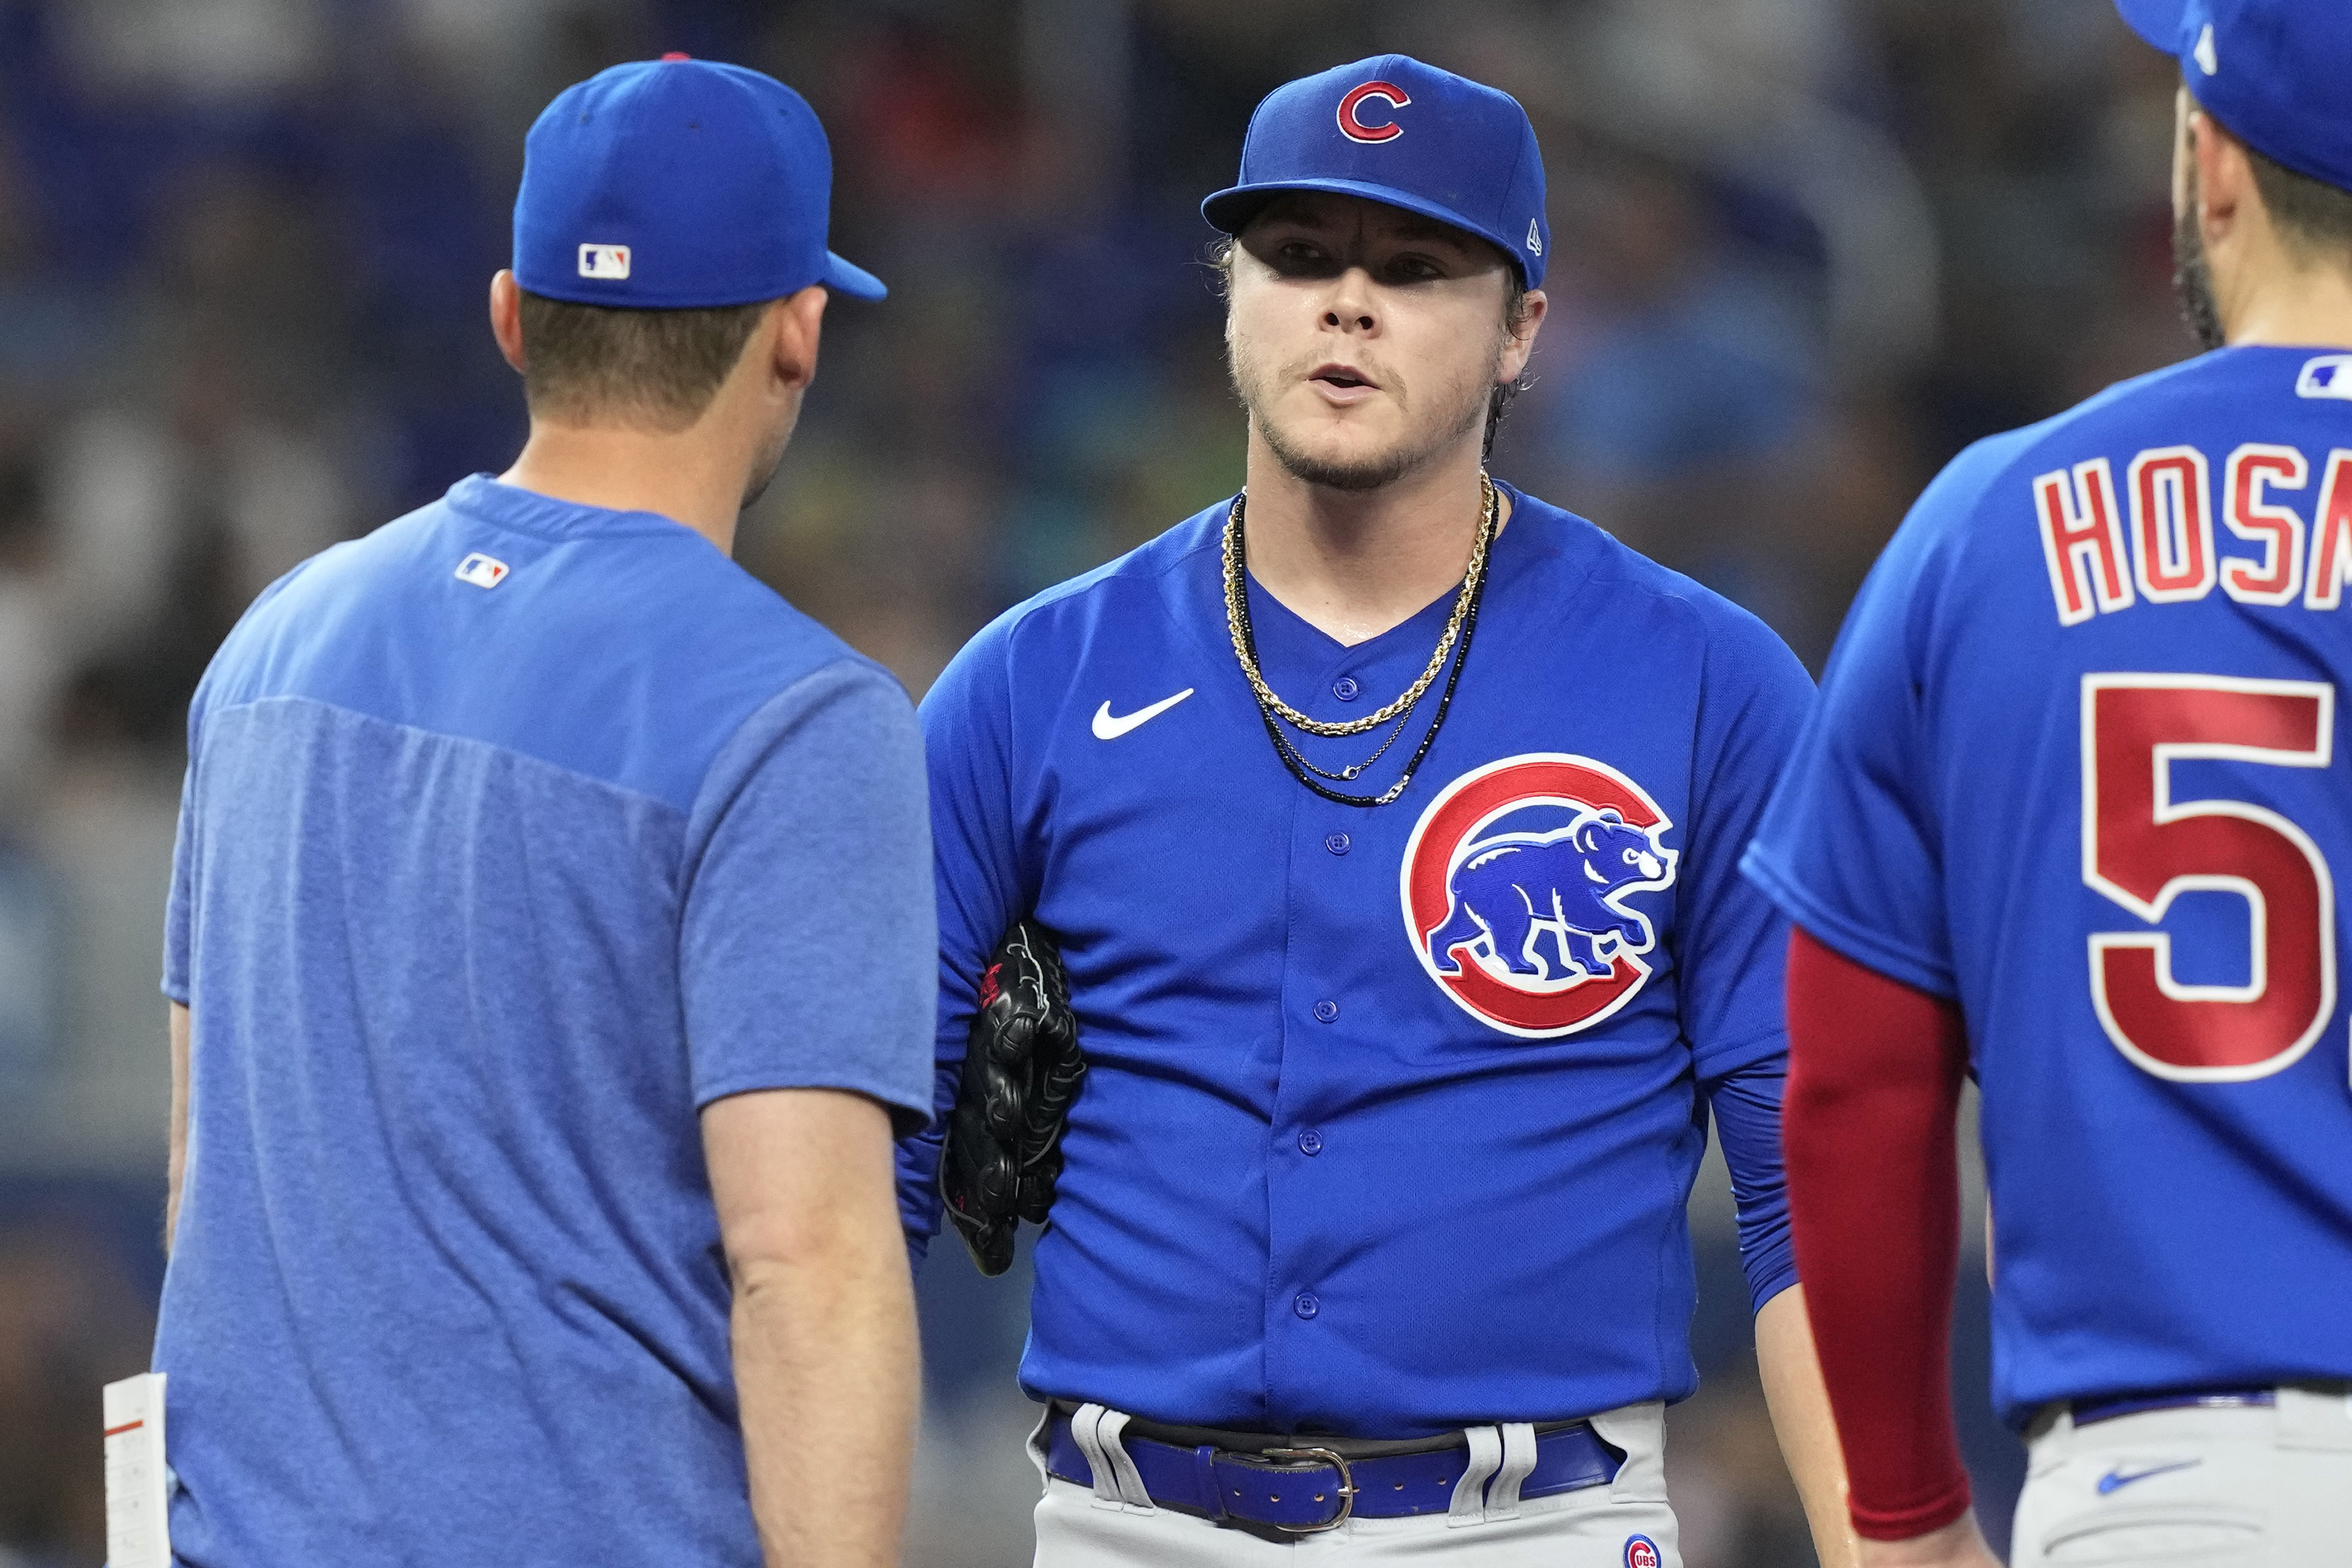 Cubs make history as entire infield selected to start in All-Star Game